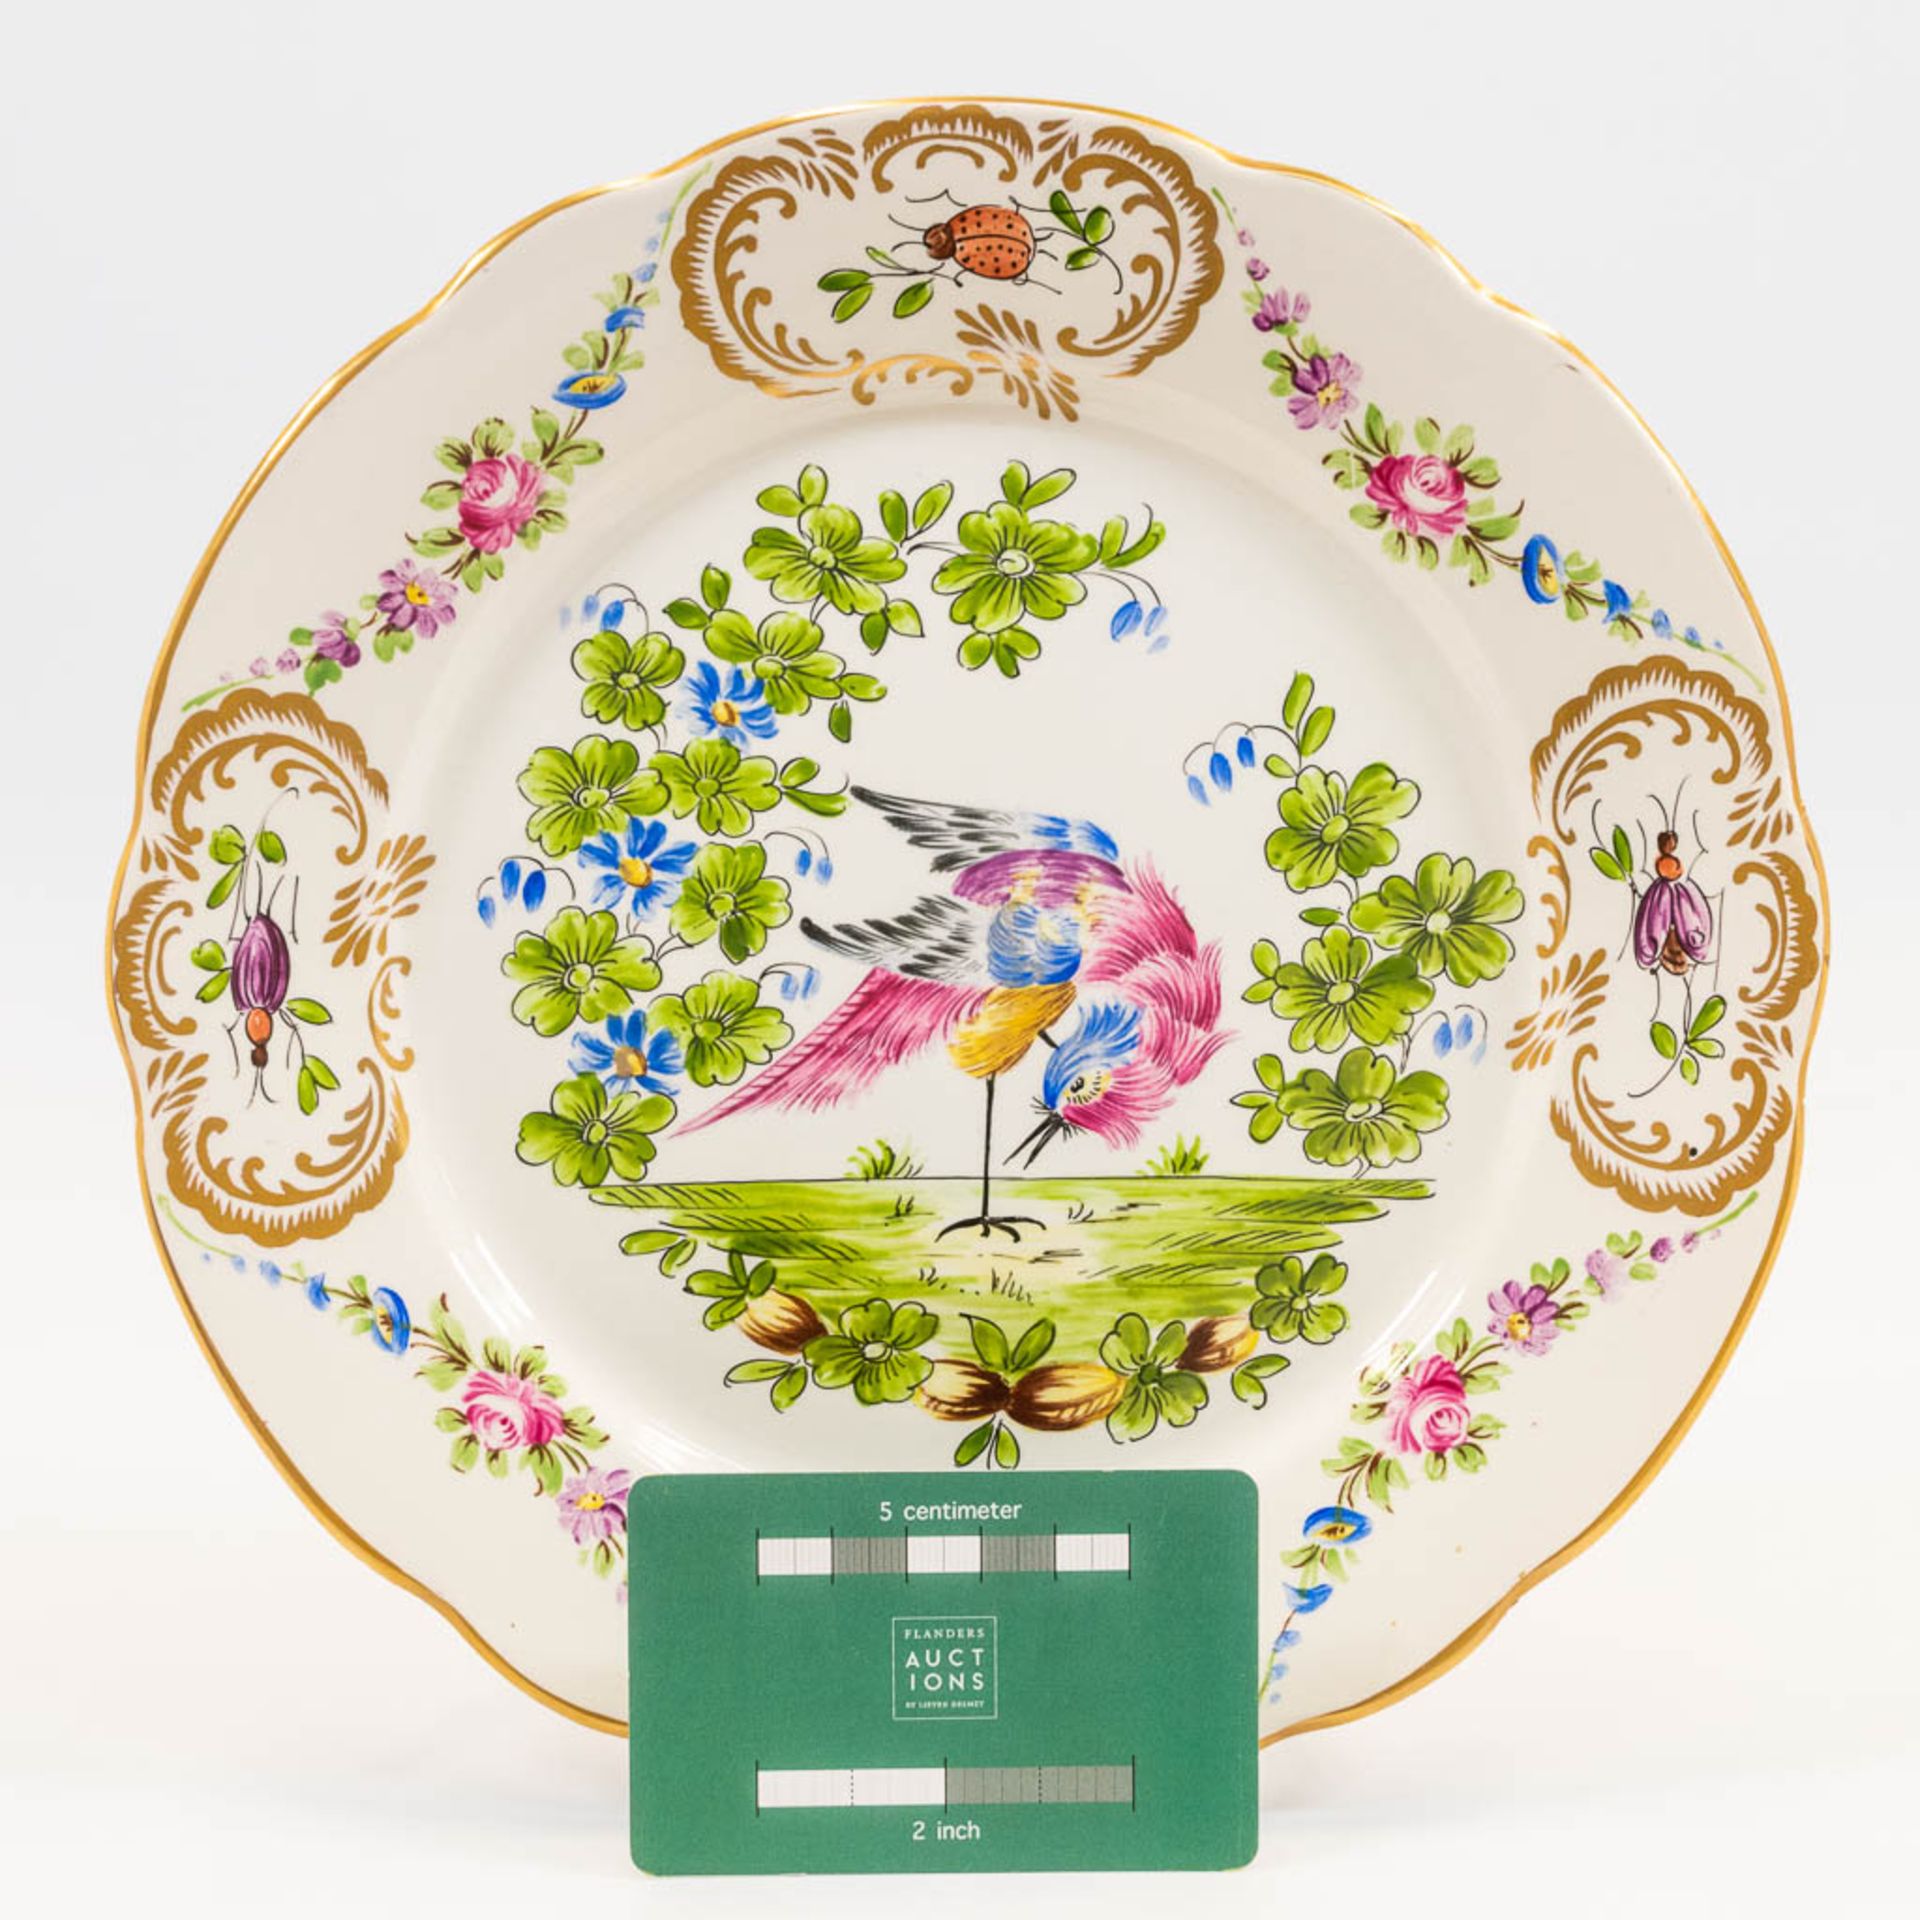 A collection of 2 pairs of faience display plates with hand-painted decor and made in Clamecy, Franc - Image 9 of 17